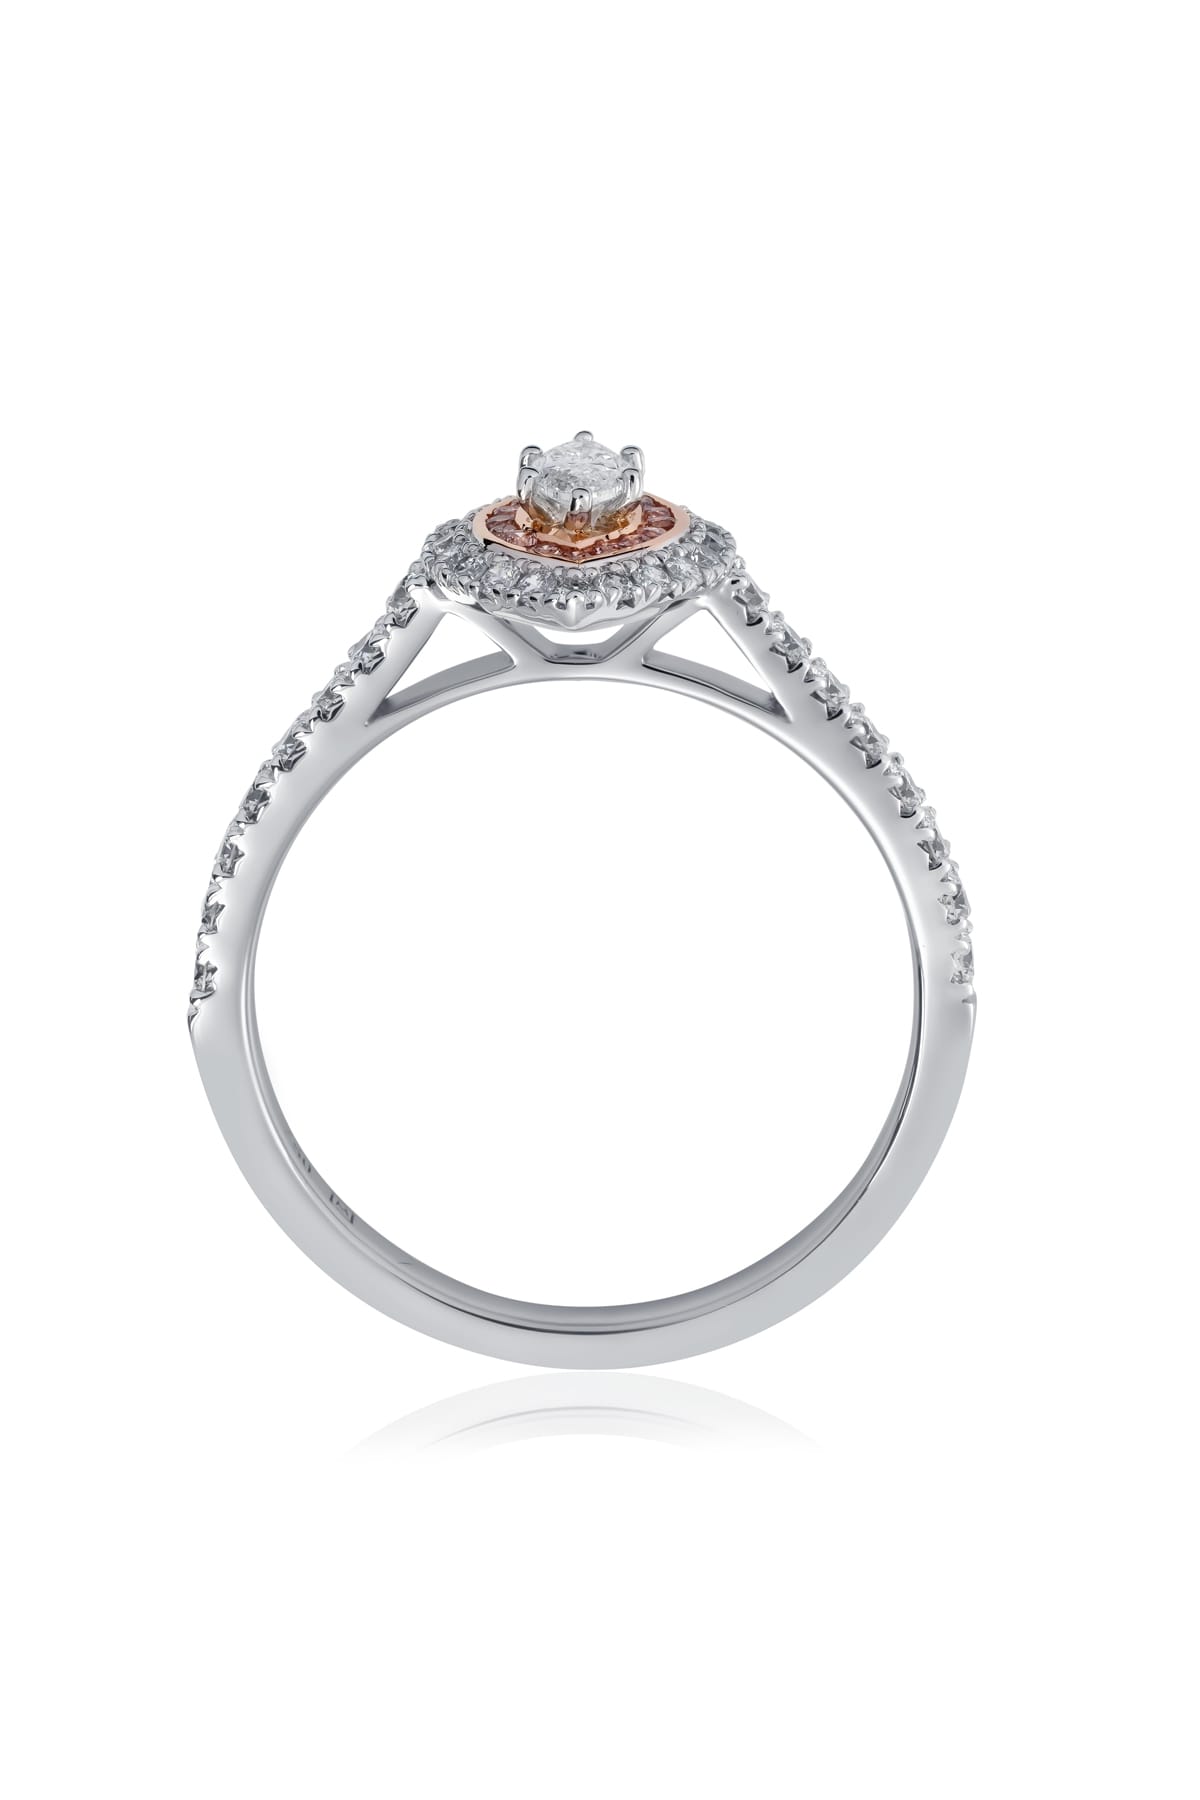 Marquise Diamond Halo Ring With A Halo OfArgyle Pink Diamonds from LeGassick.